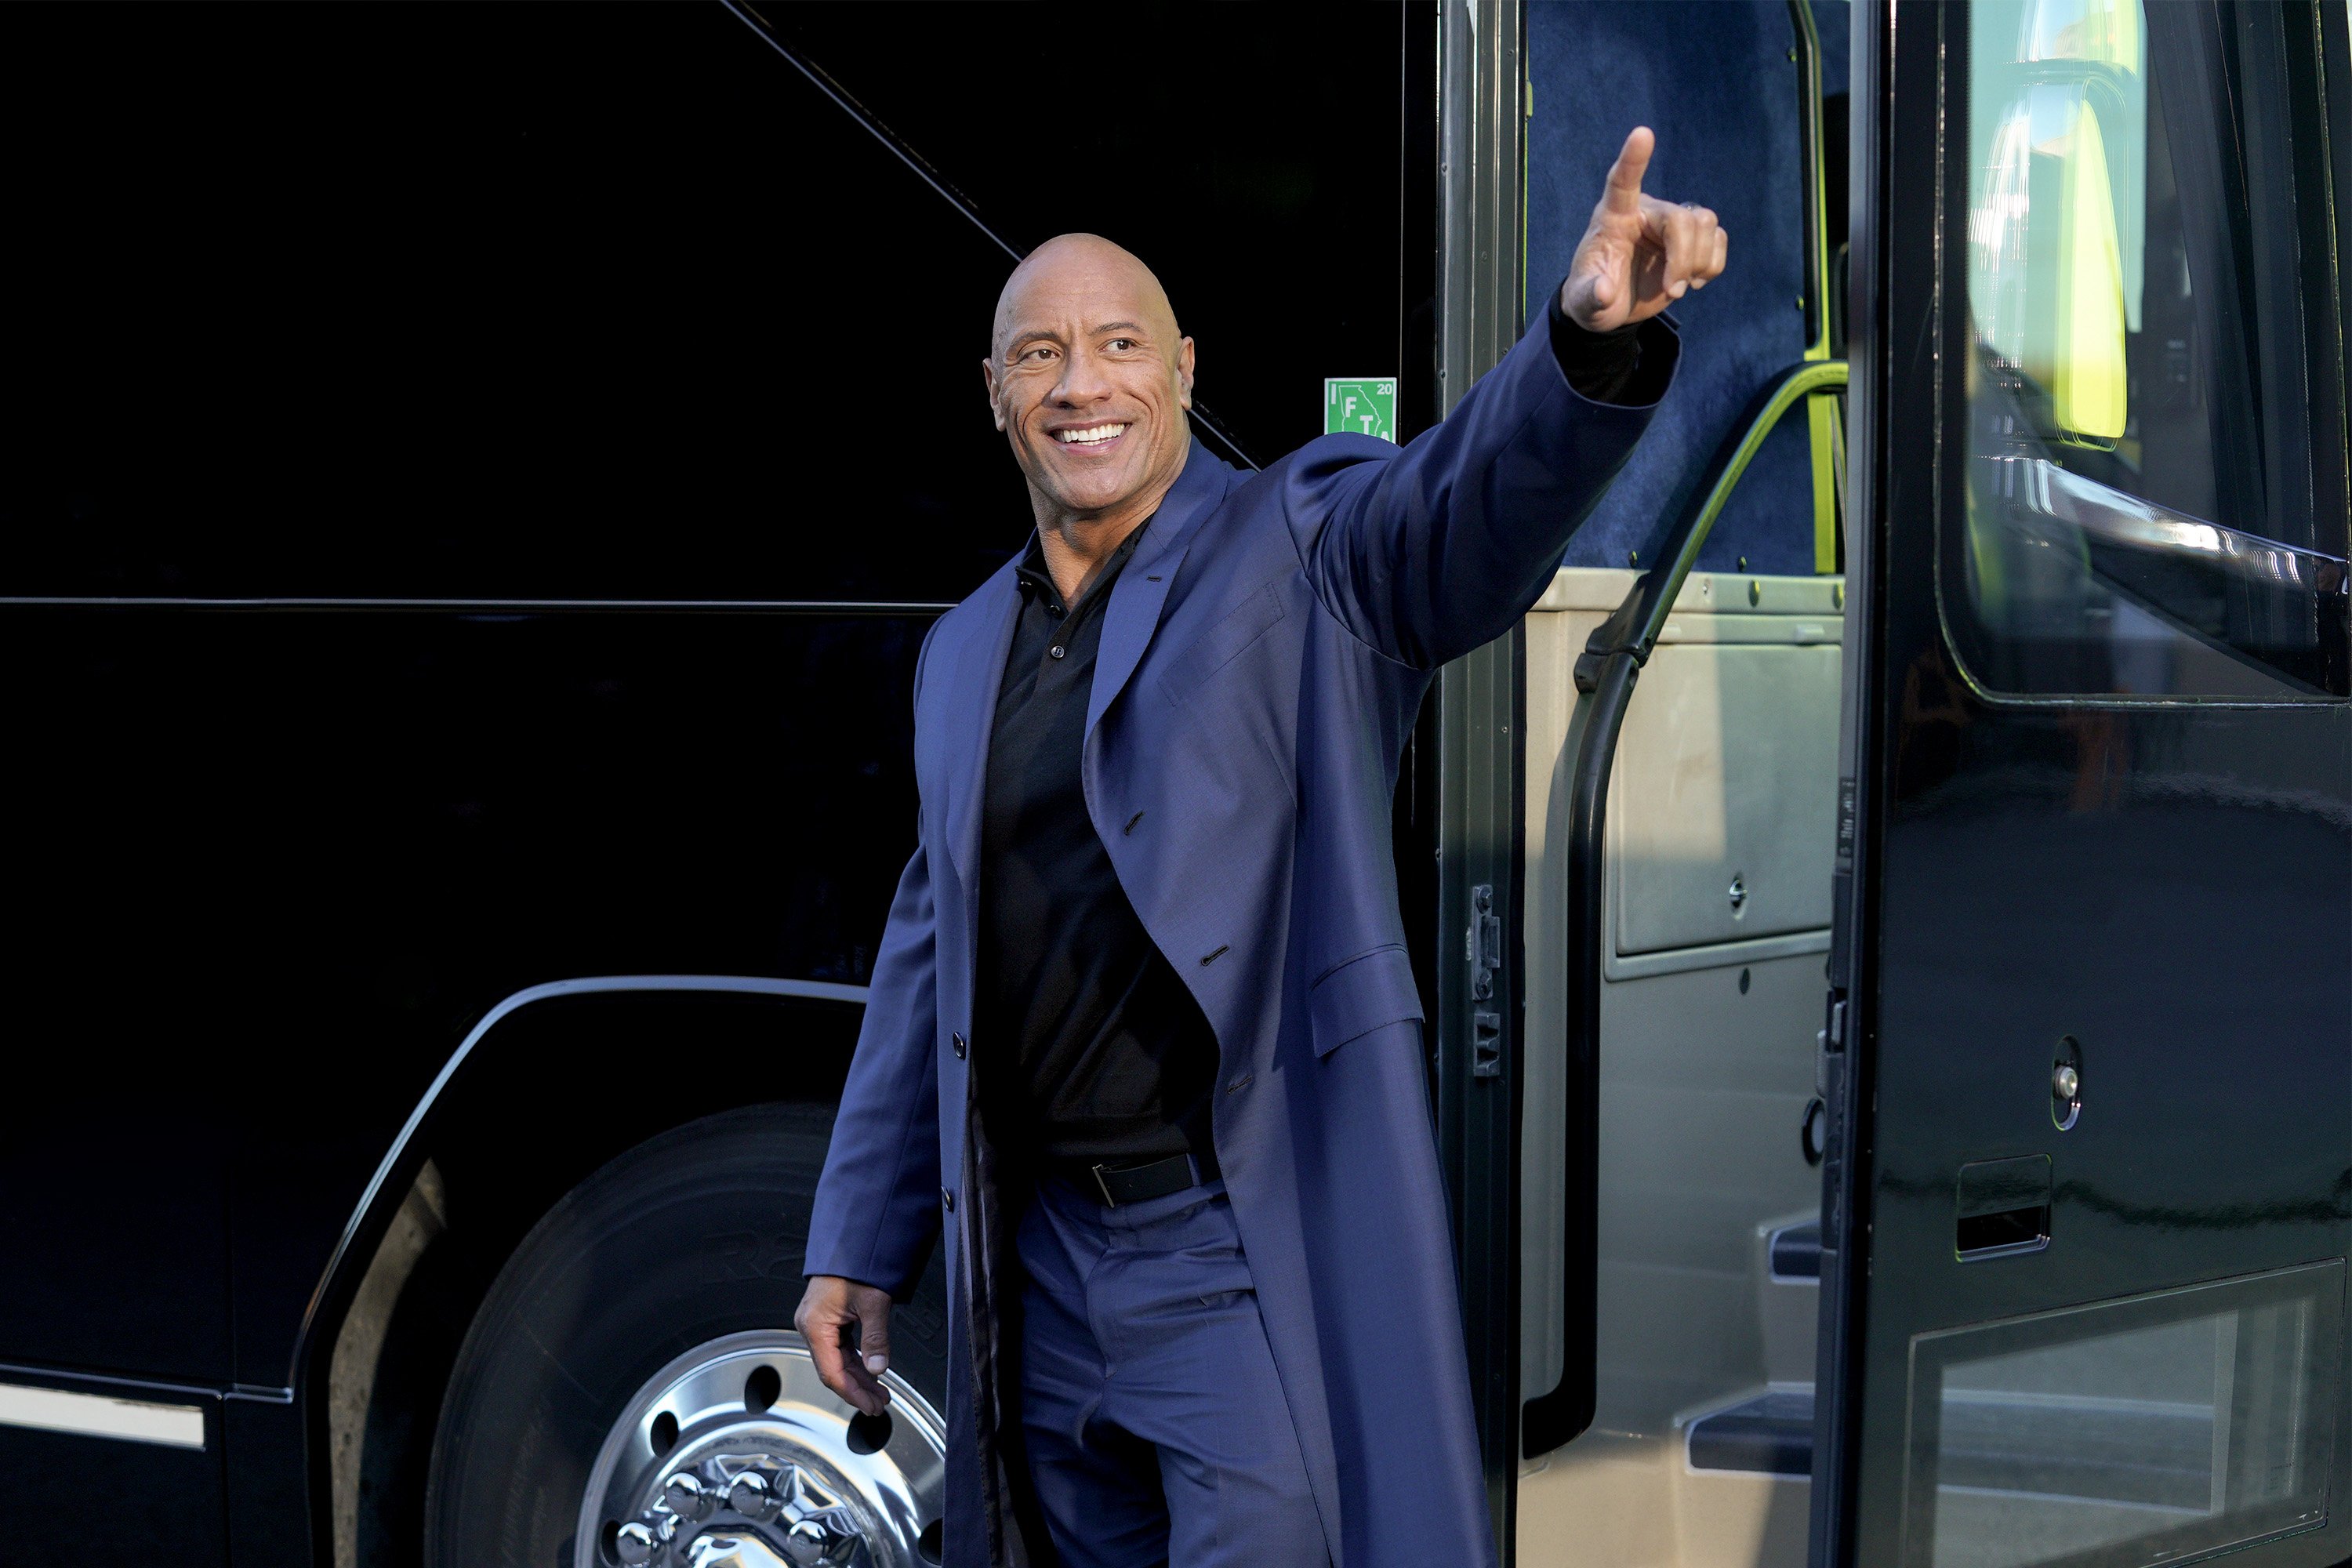 Dwayne Johnson pictured in one the scenes of his new autobiographical series, "Young Rock," which premiered in February, 2021. | Photo: Getty Images.